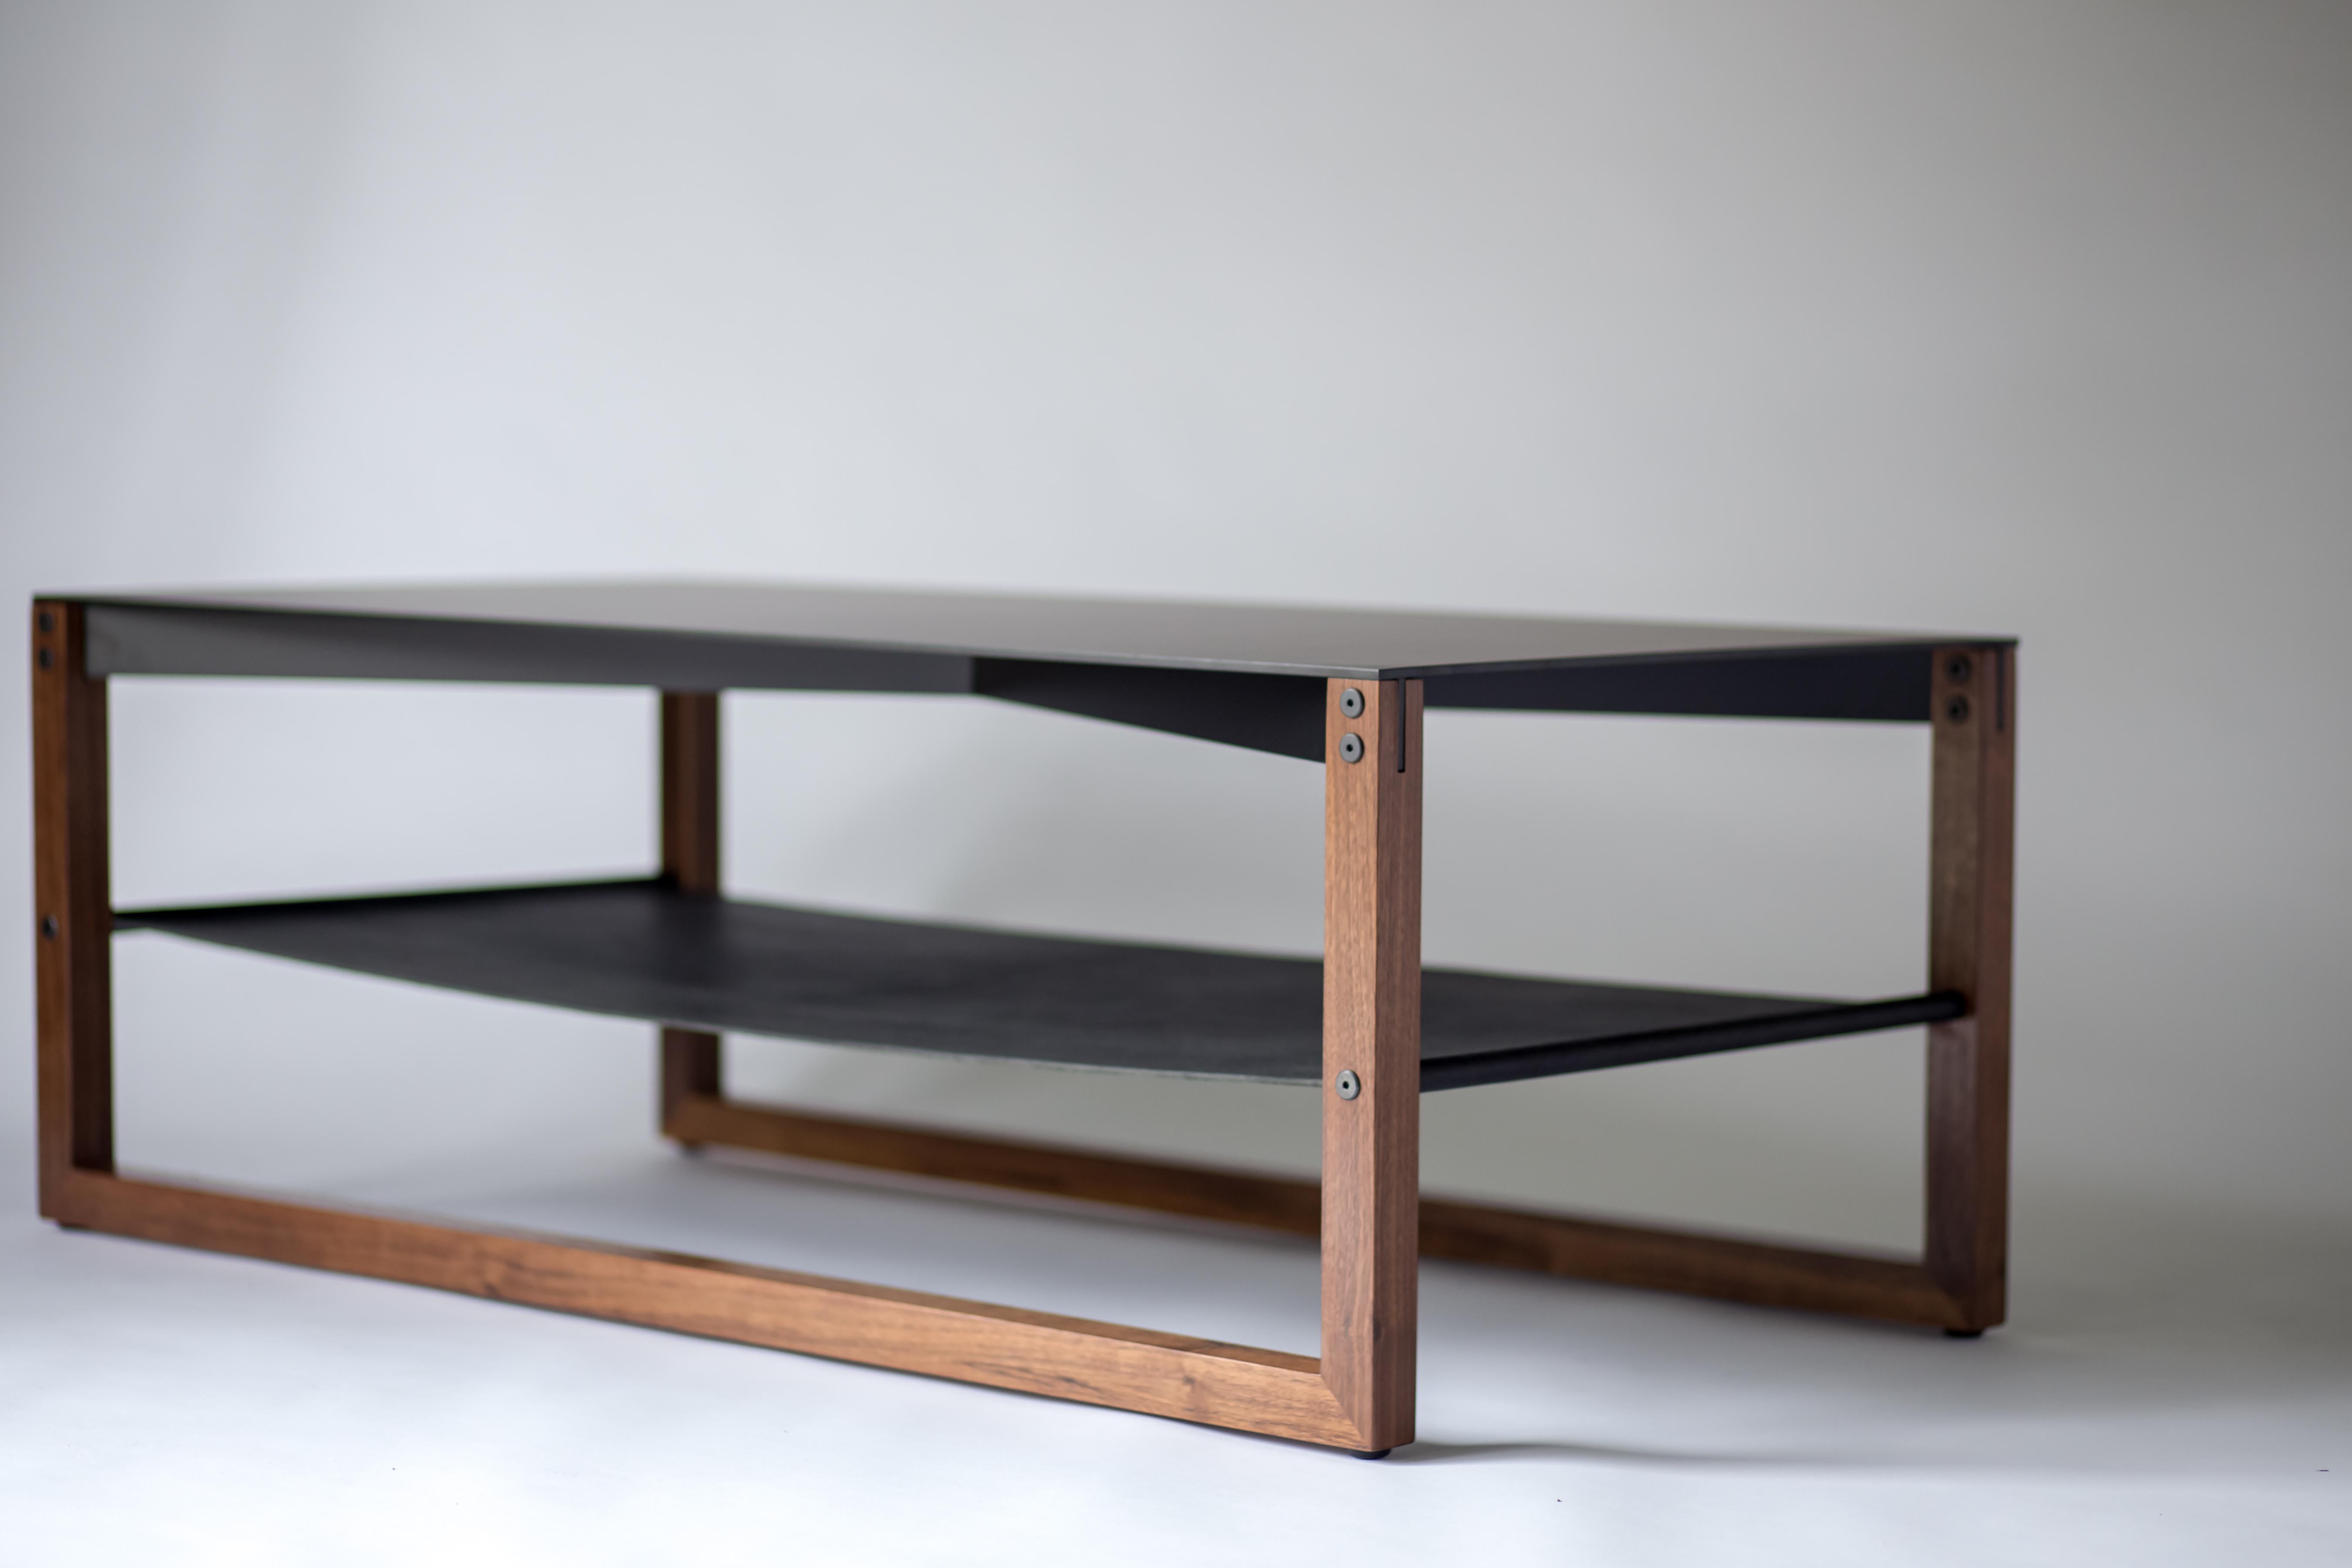 The Sling - modern aluminum, leather, and walnut coffee table

Minimal and elegant form paired with a balanced and thoughtful design. The Sling coffee table features powder-coated aluminum, blackened hand-stitched leather, and hand finished